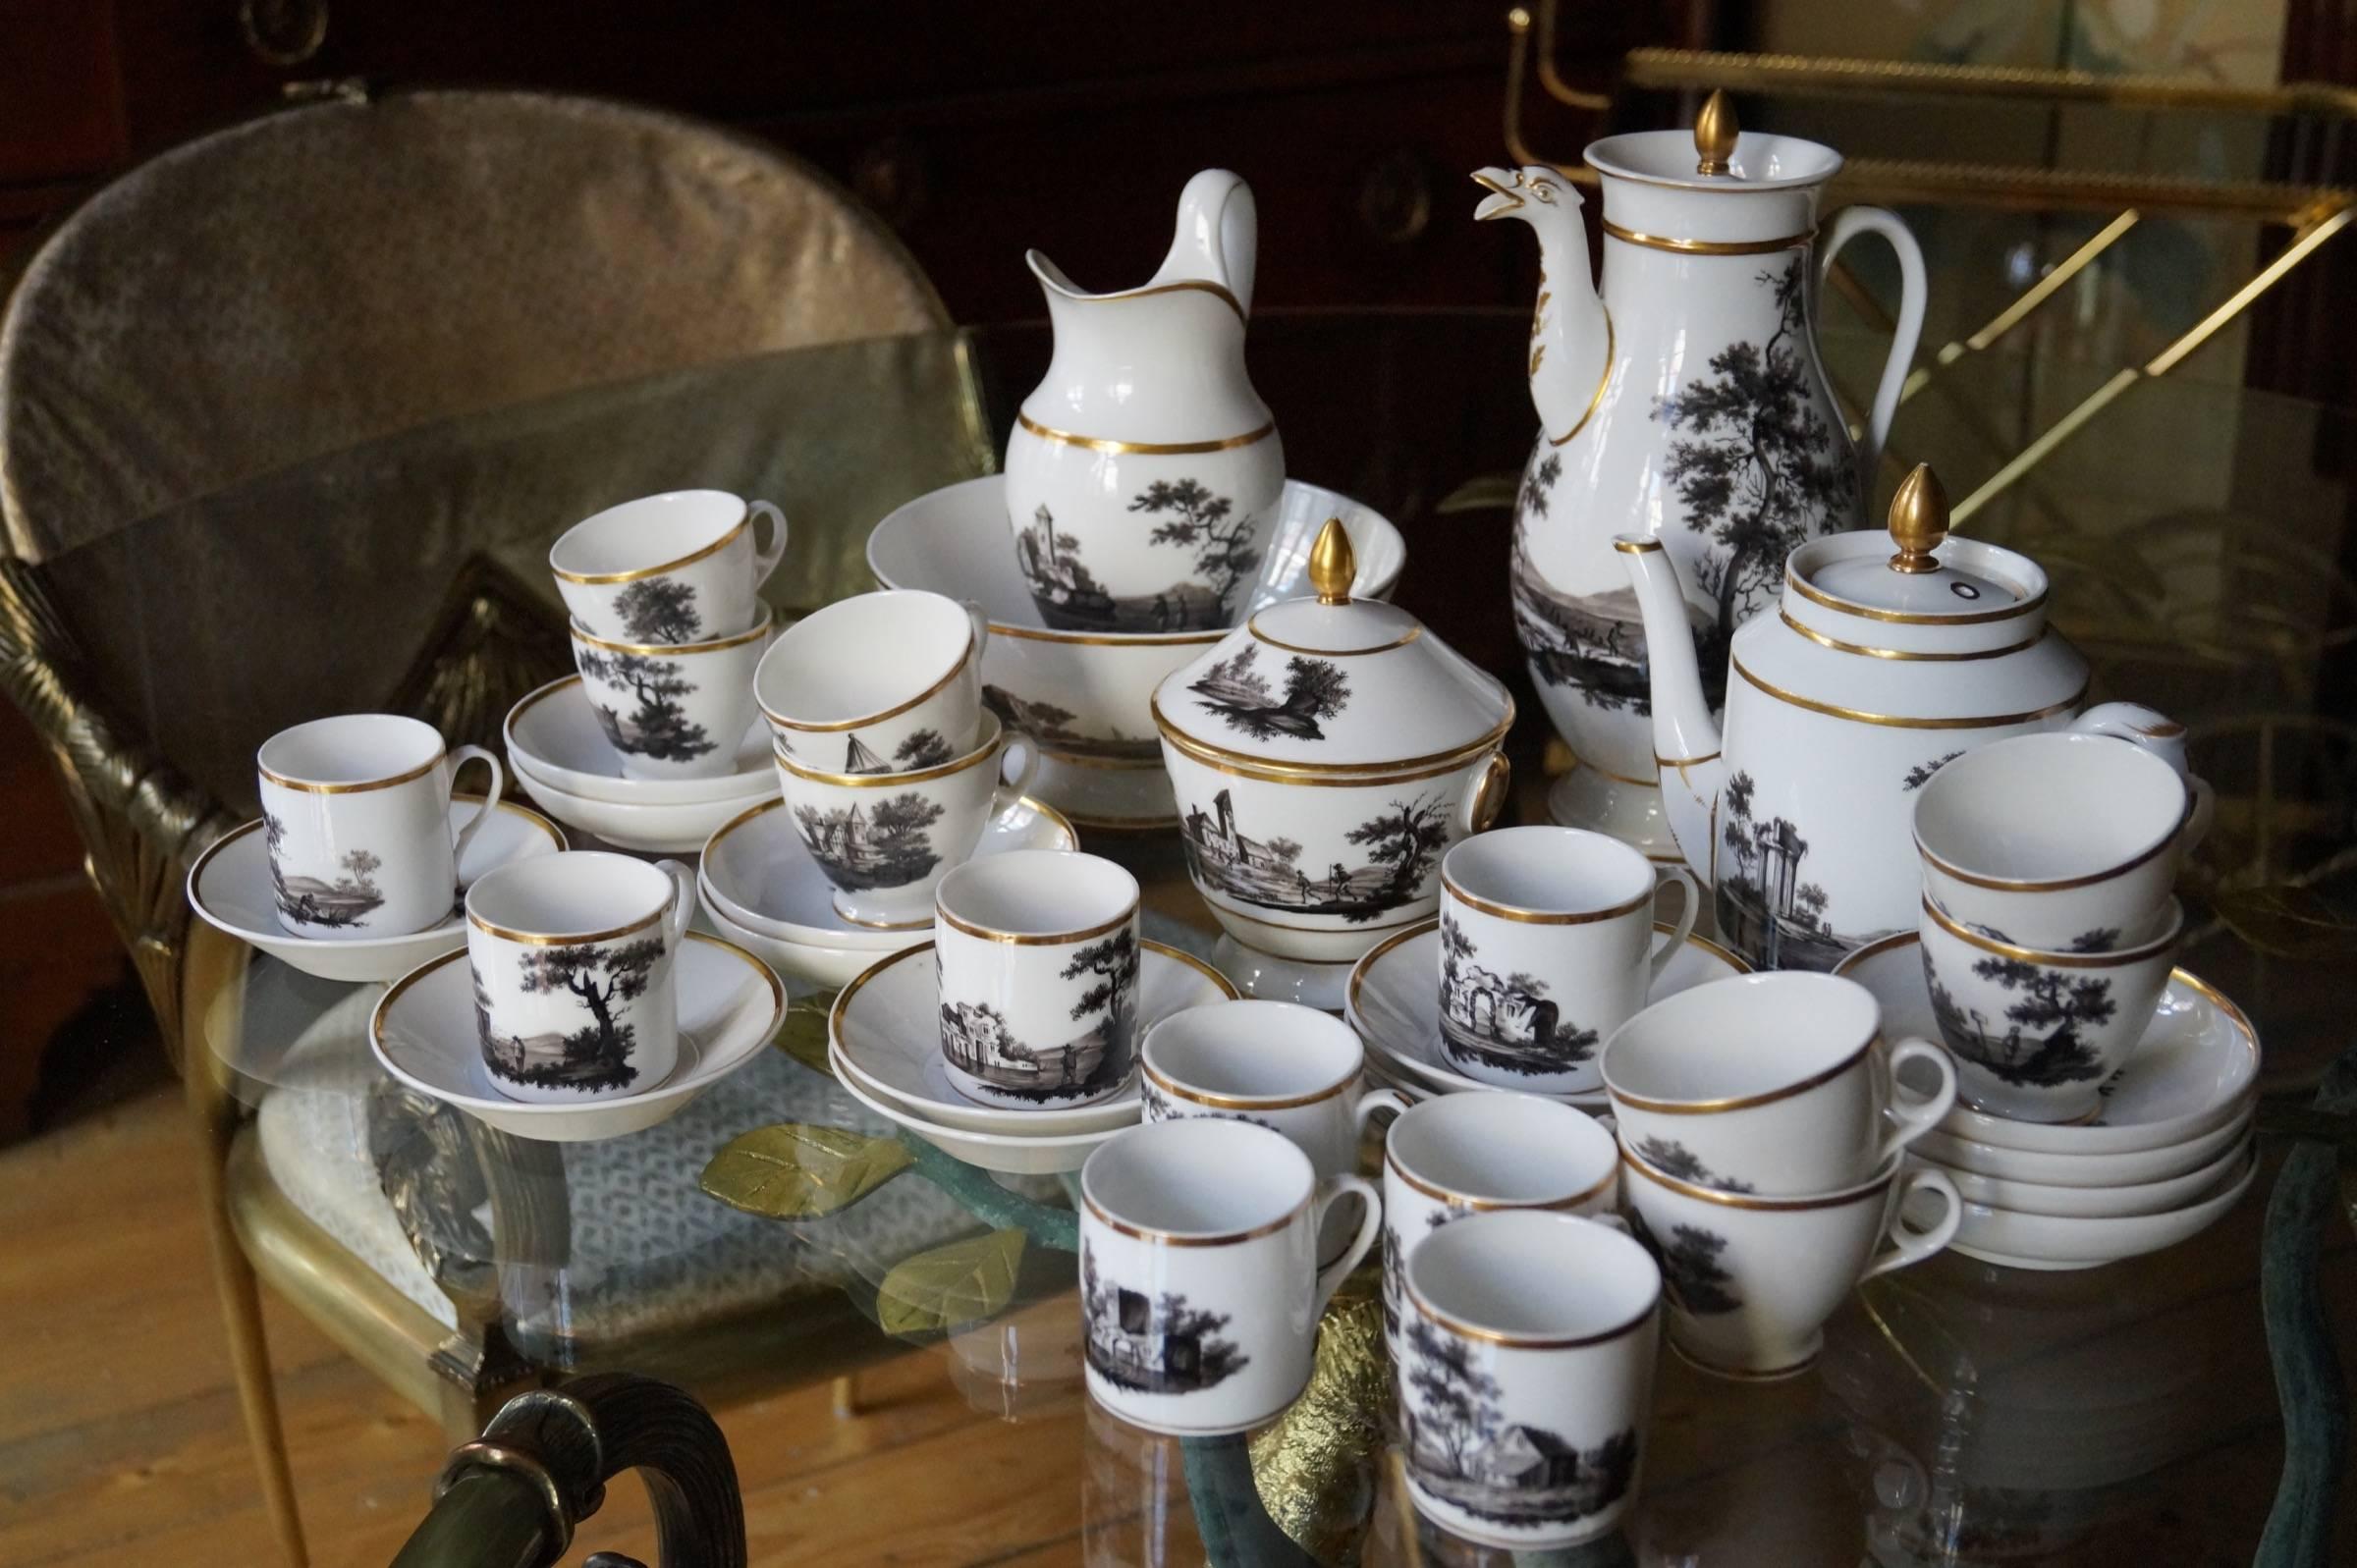 A fabulous hand-painted in black / sepia 'Old Paris' porcelain coffee and tea service. Every piece has its own unique hand-painted decor.

Coffeepot 28.5 cm high.
Teapot 19.5 cm high.
Two sugar bowl and cover 16.5 cm high.
Hotwater jug 17.5 cm